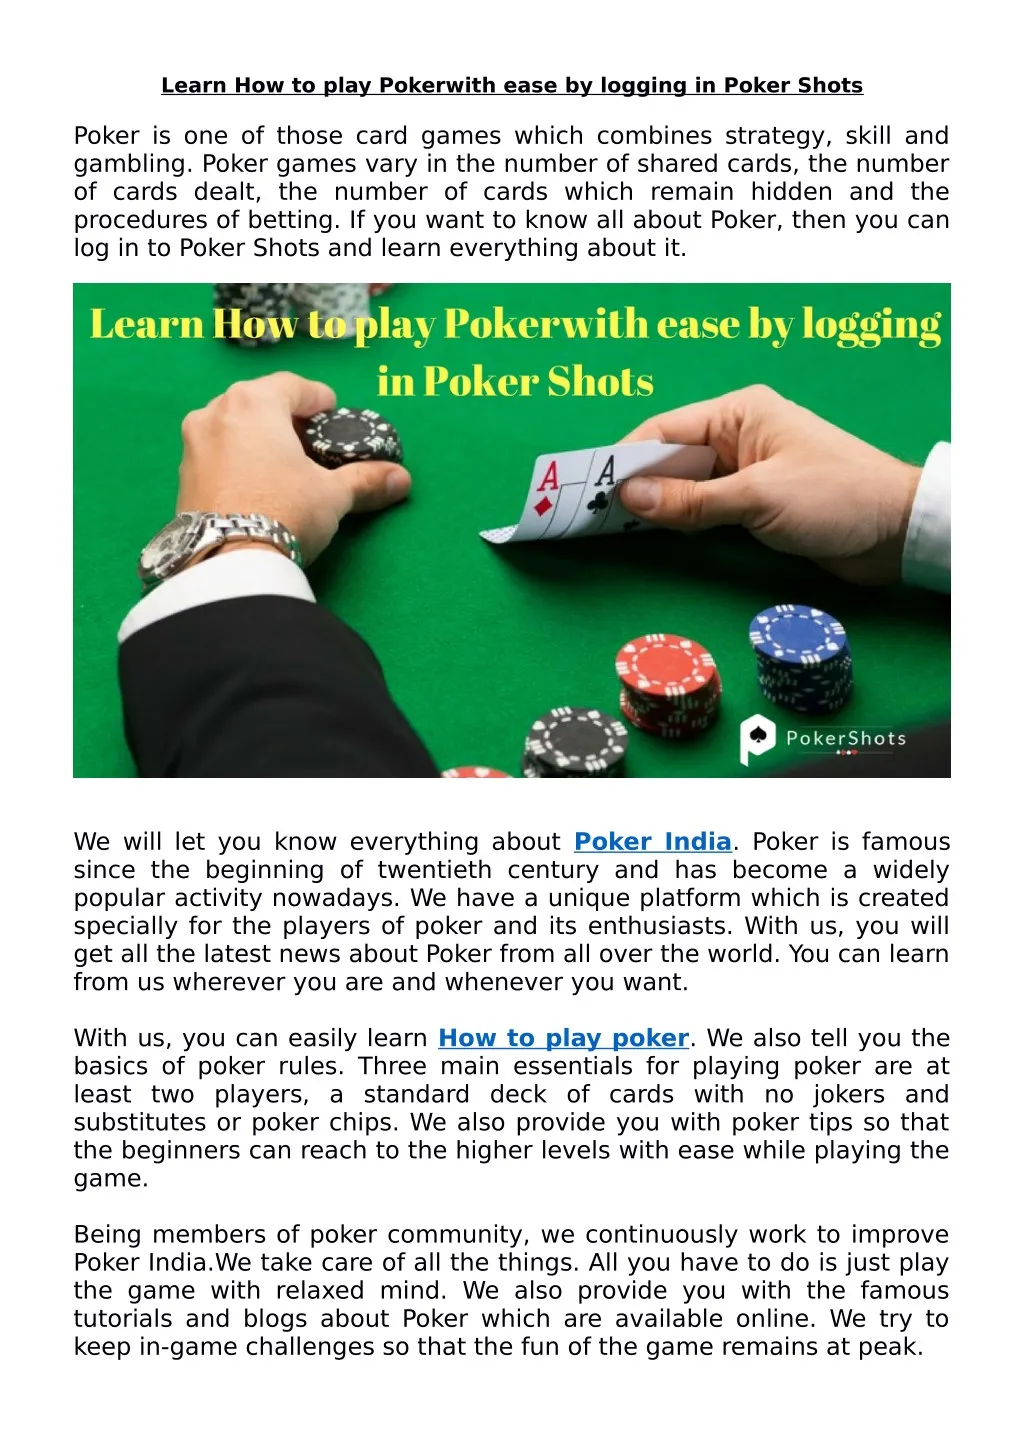 learn how to play pokerwith ease by logging